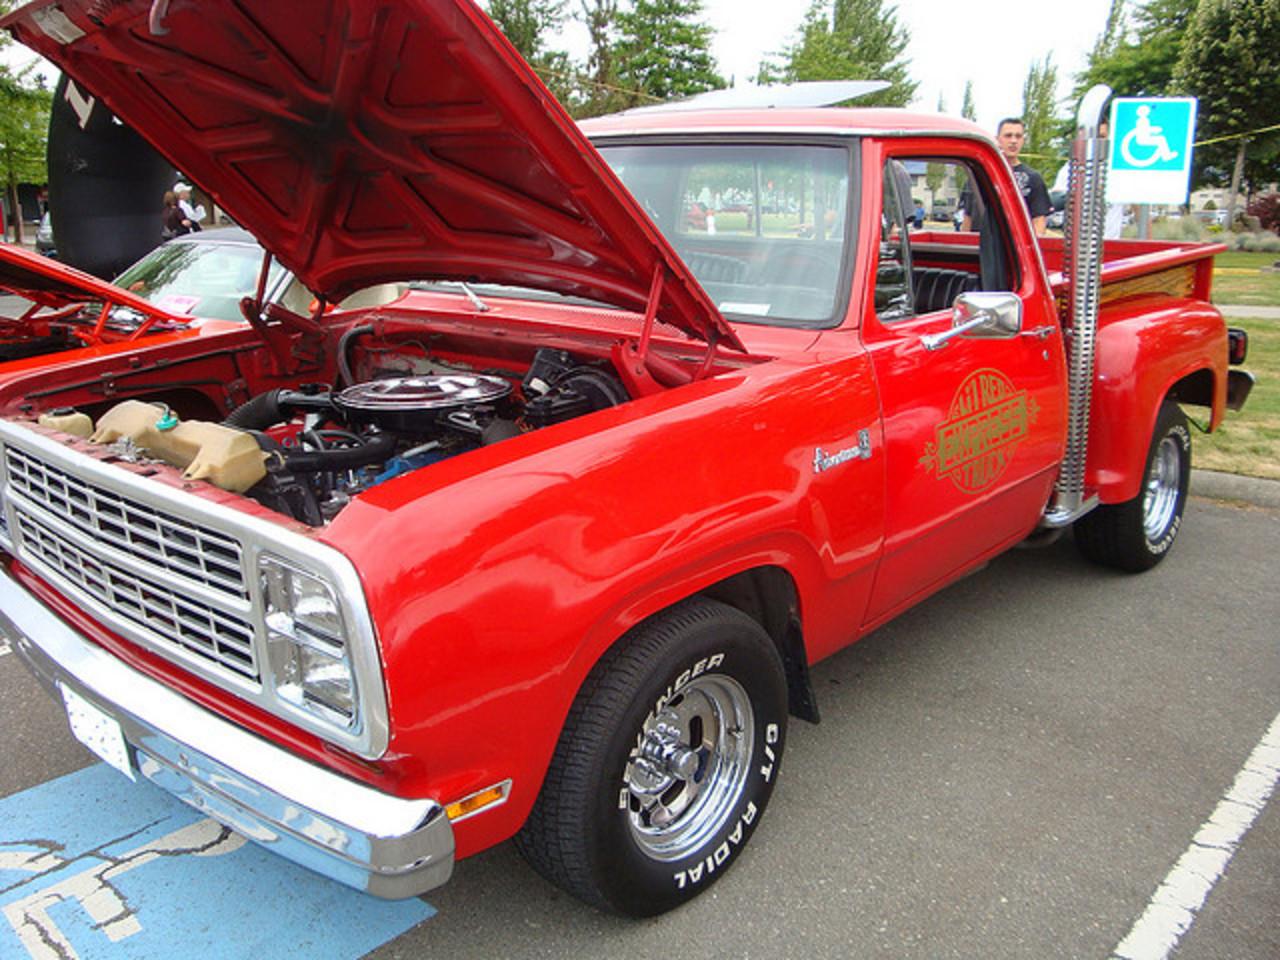 1979 Dodge D-150 Lil' Red Express Truck | Flickr - Photo Sharing!